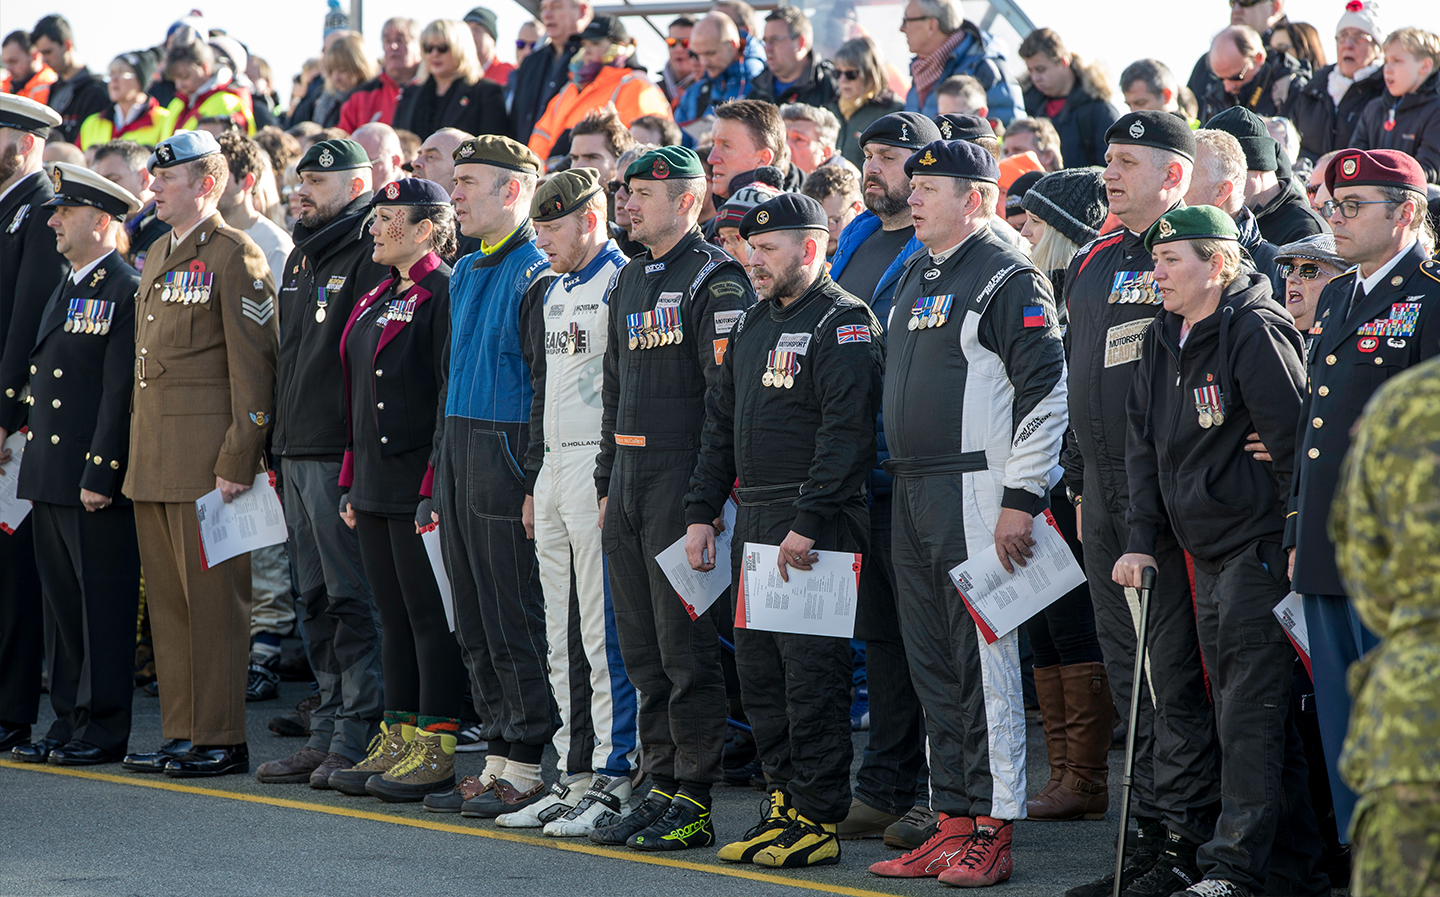 A remarkable mission: On track at Race of Remembrance 2019 - Sunday Service